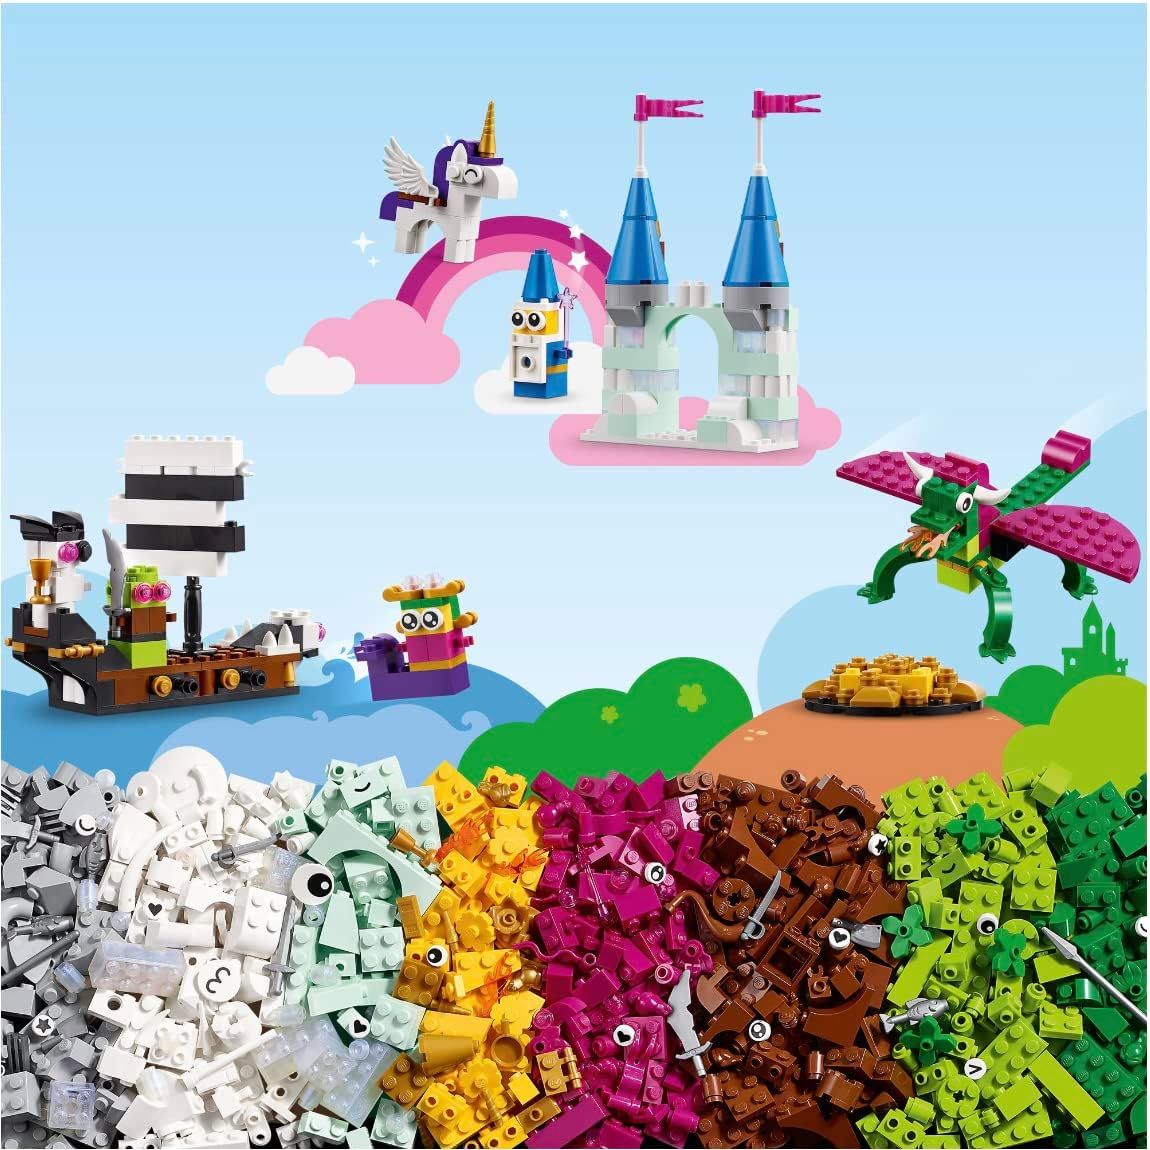 Lego 11033 Classic Creative Fantasy Universe Set, Building Adventure with Unicorn Toy, Castle, Dragon and Pirate Ship Builds